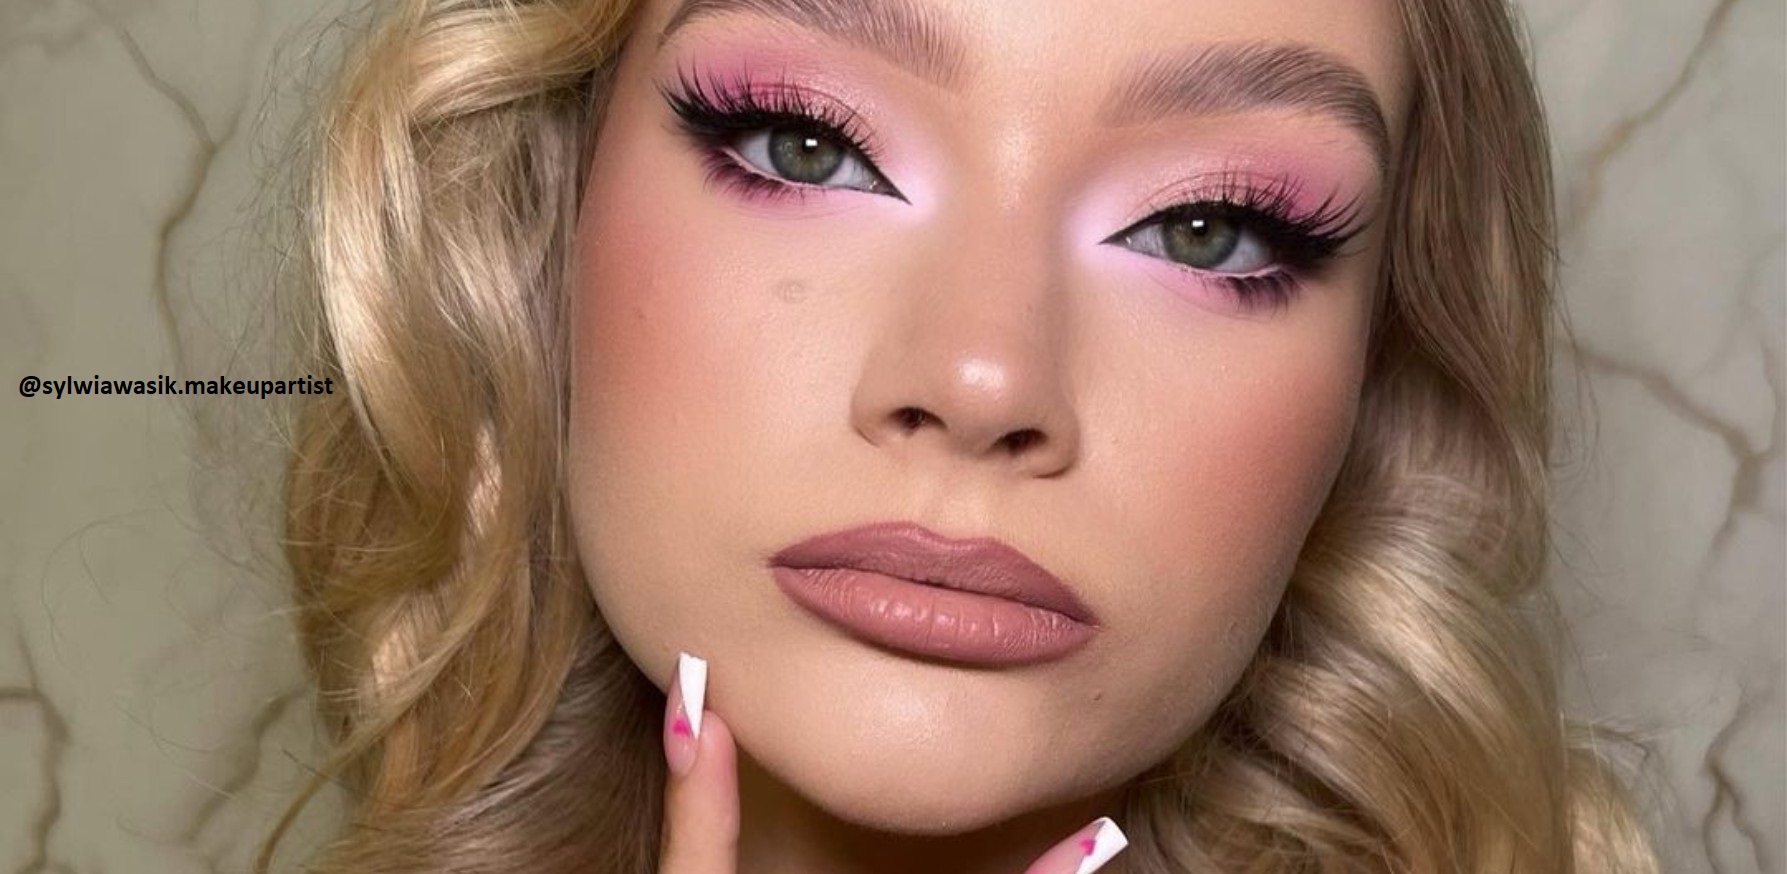 Baby Pink Makeup Will Give You An Extra Natural Look